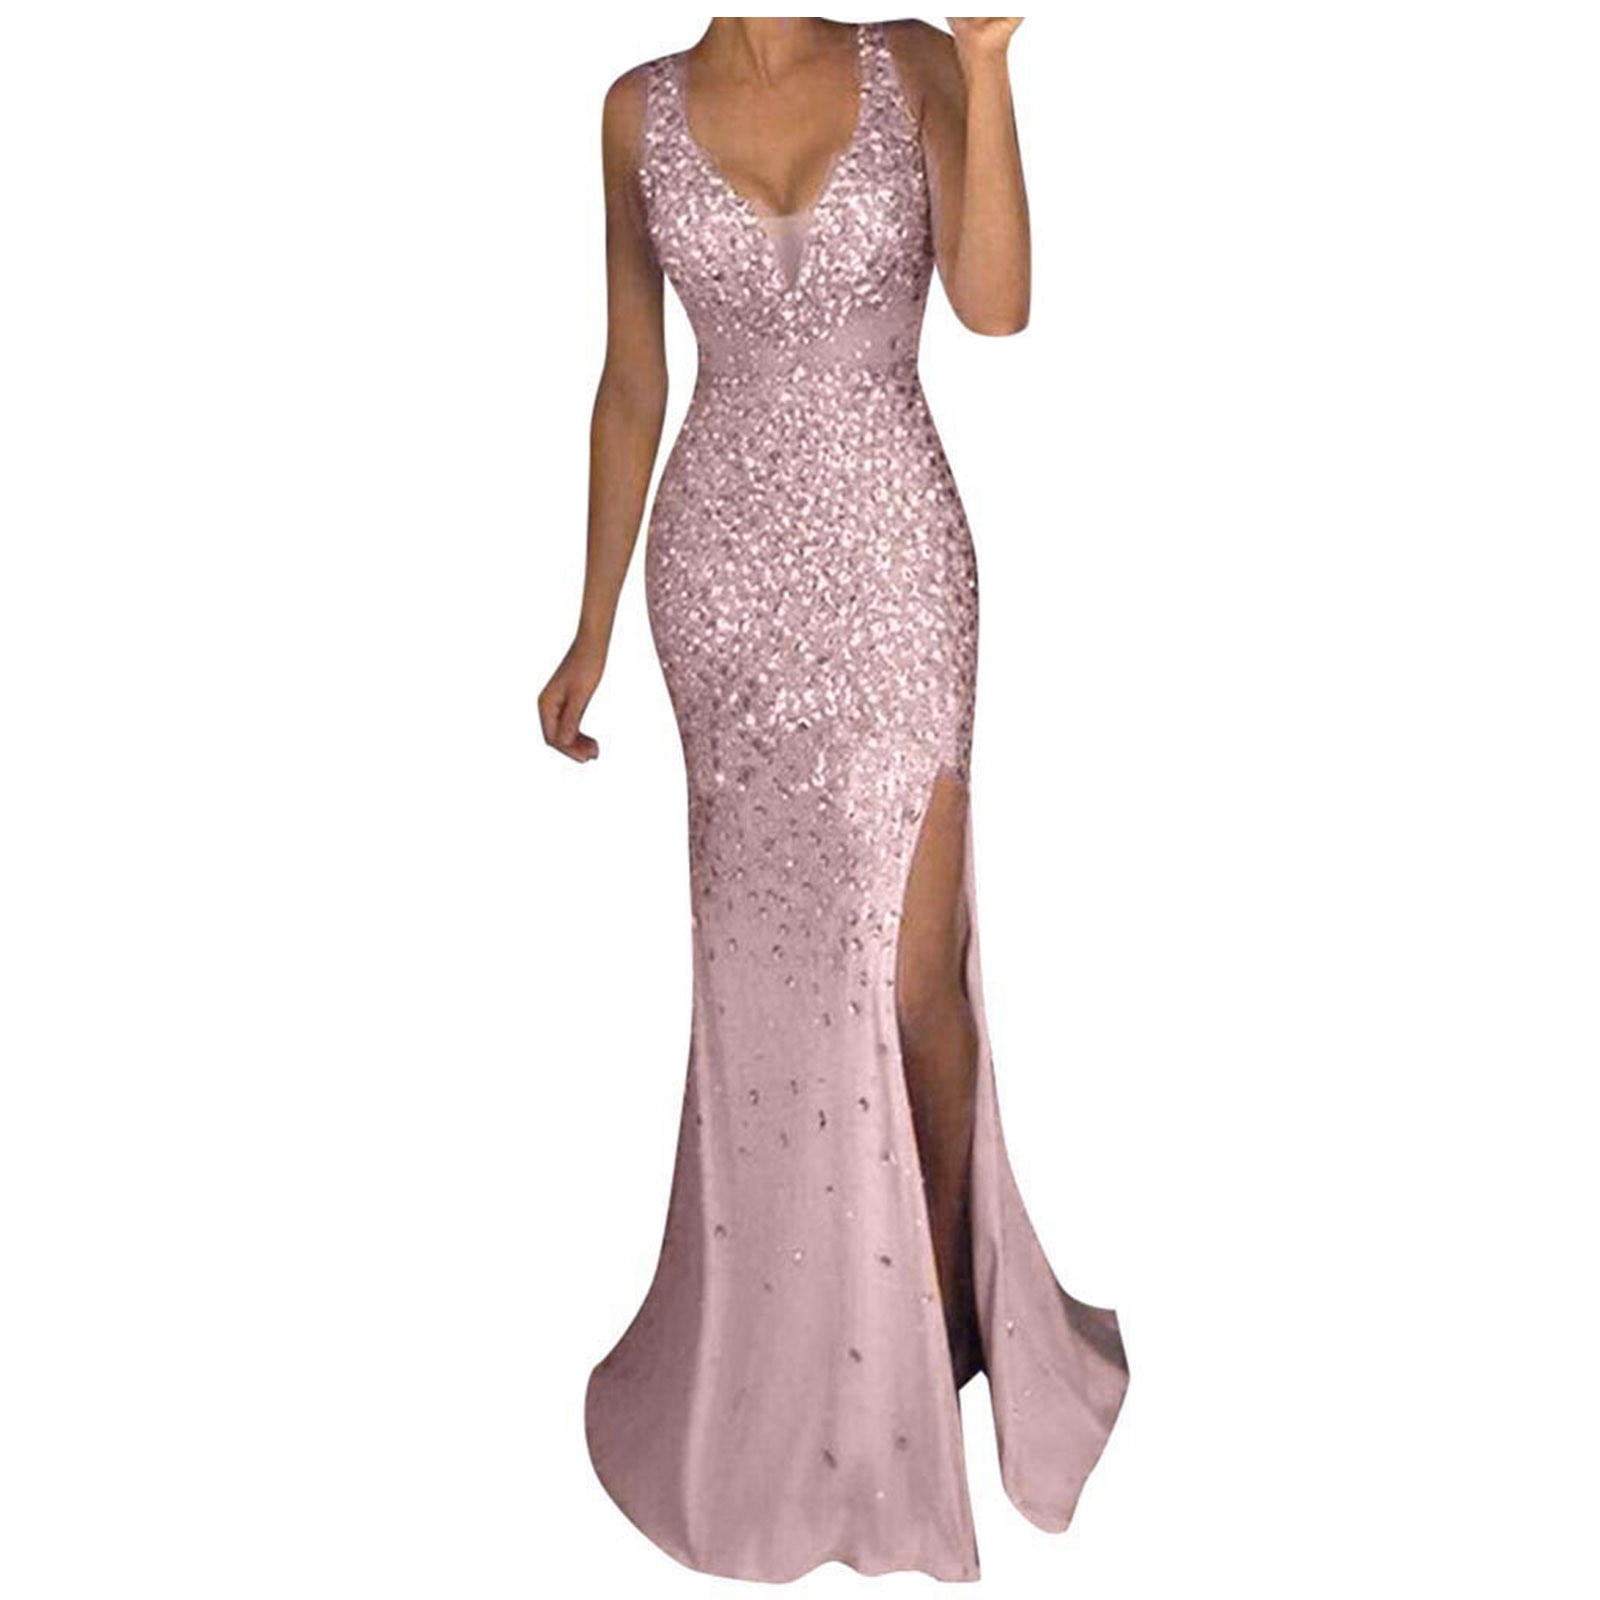 〖Hellobye〗Women Sequin Prom Party Ball Gown Sexy Gold Evening ...